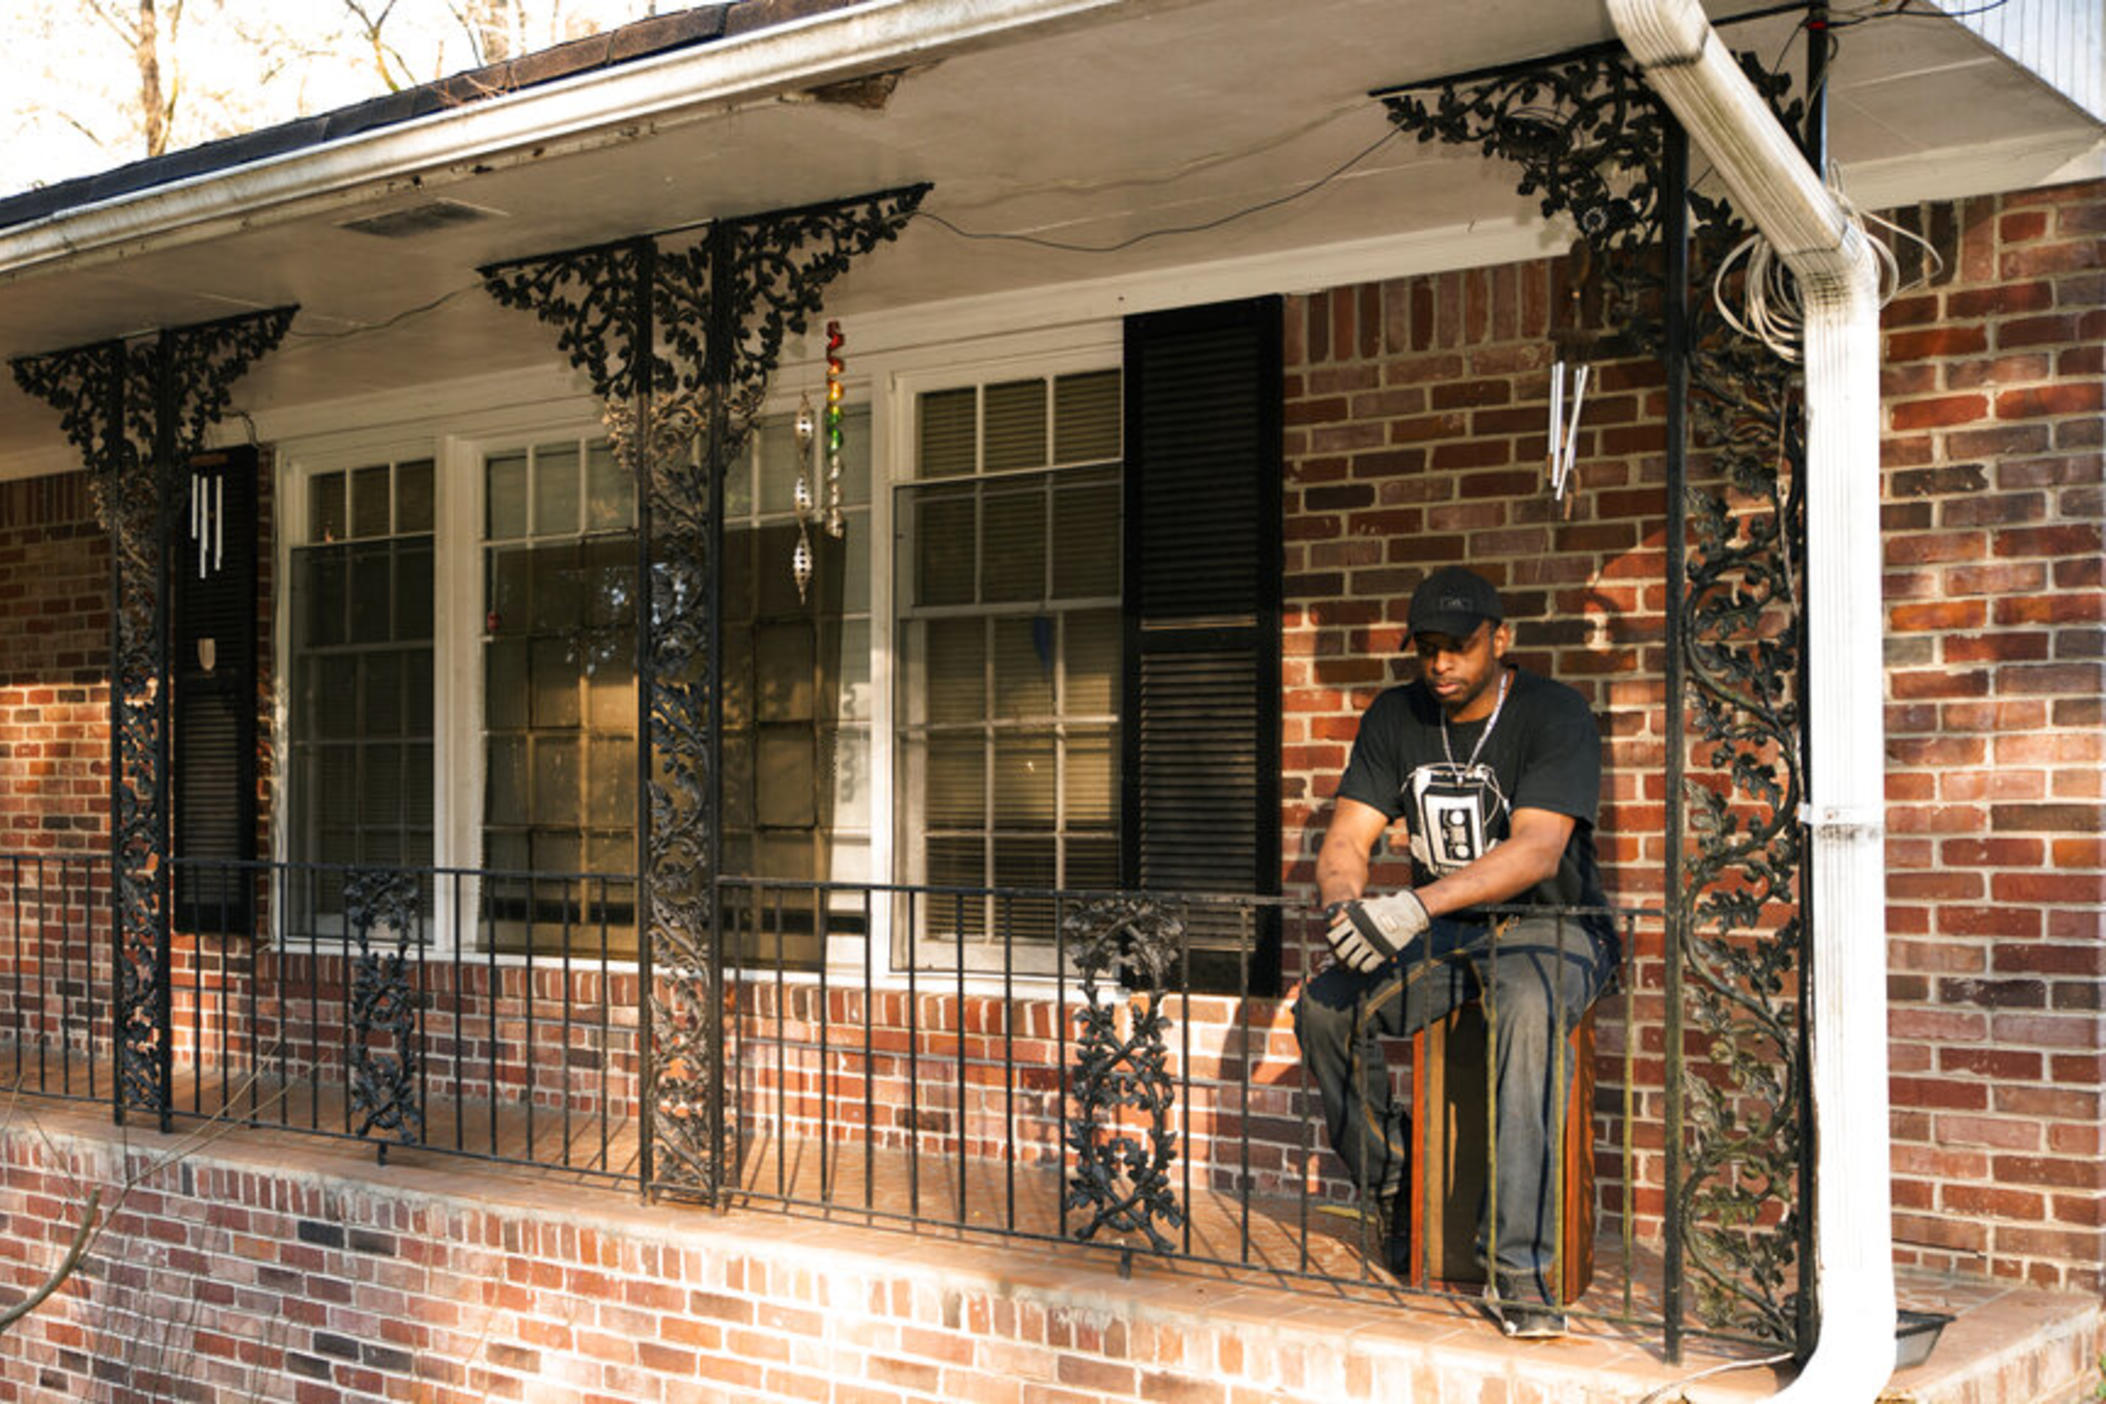 Prince Beatty takes a seat on a broken speaker outside on the front porch of his home in East Point, Ga. Beatty, a 47-year-old Navy veteran, faces eviction this month for unpaid rent despite his landlord getting more than $20,000 in federal rental assistance.